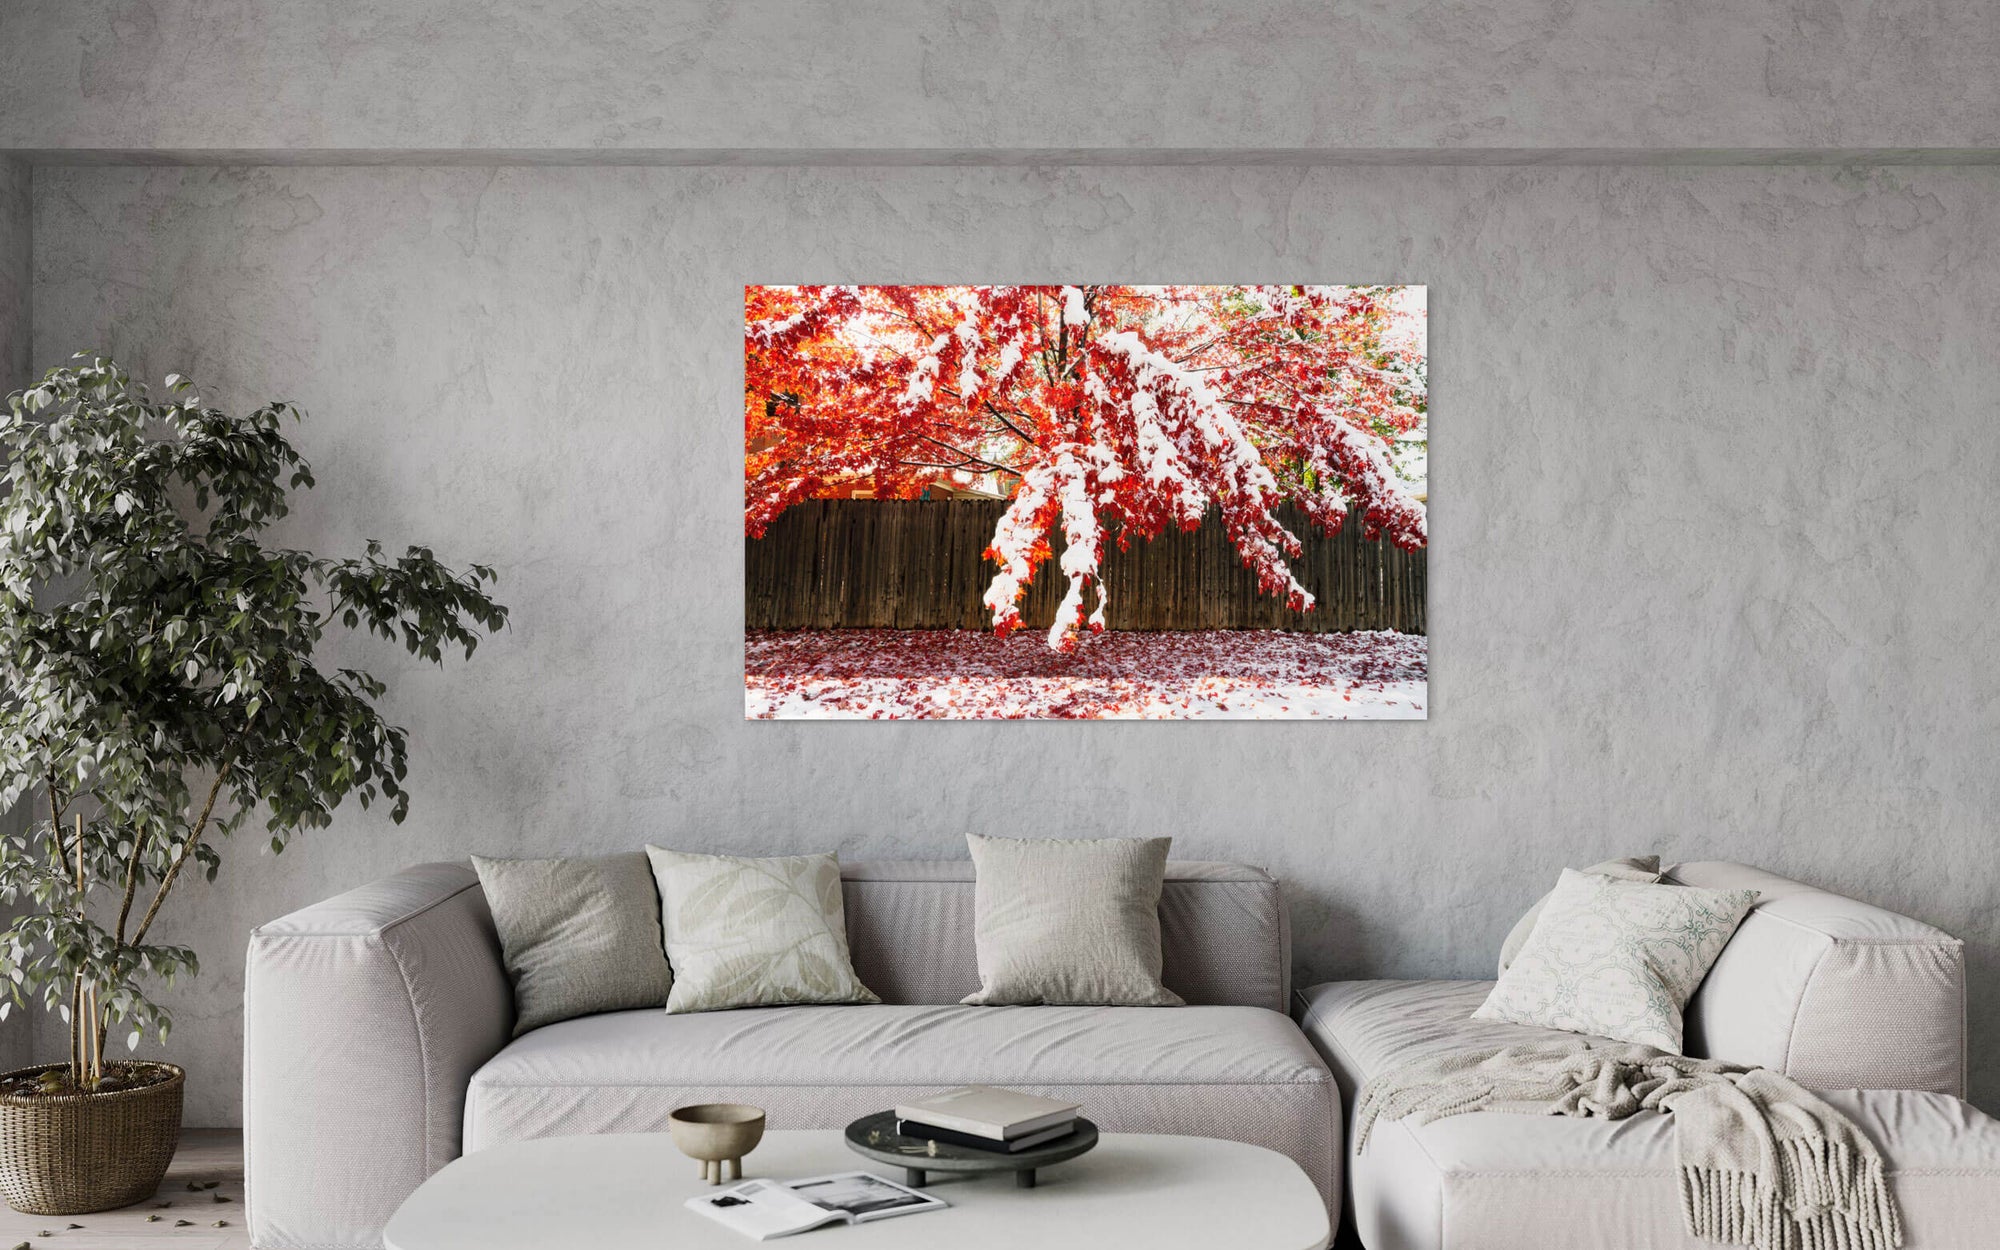 A fall colors picture from the Denver Highlands neighborhood hangs in a living room.